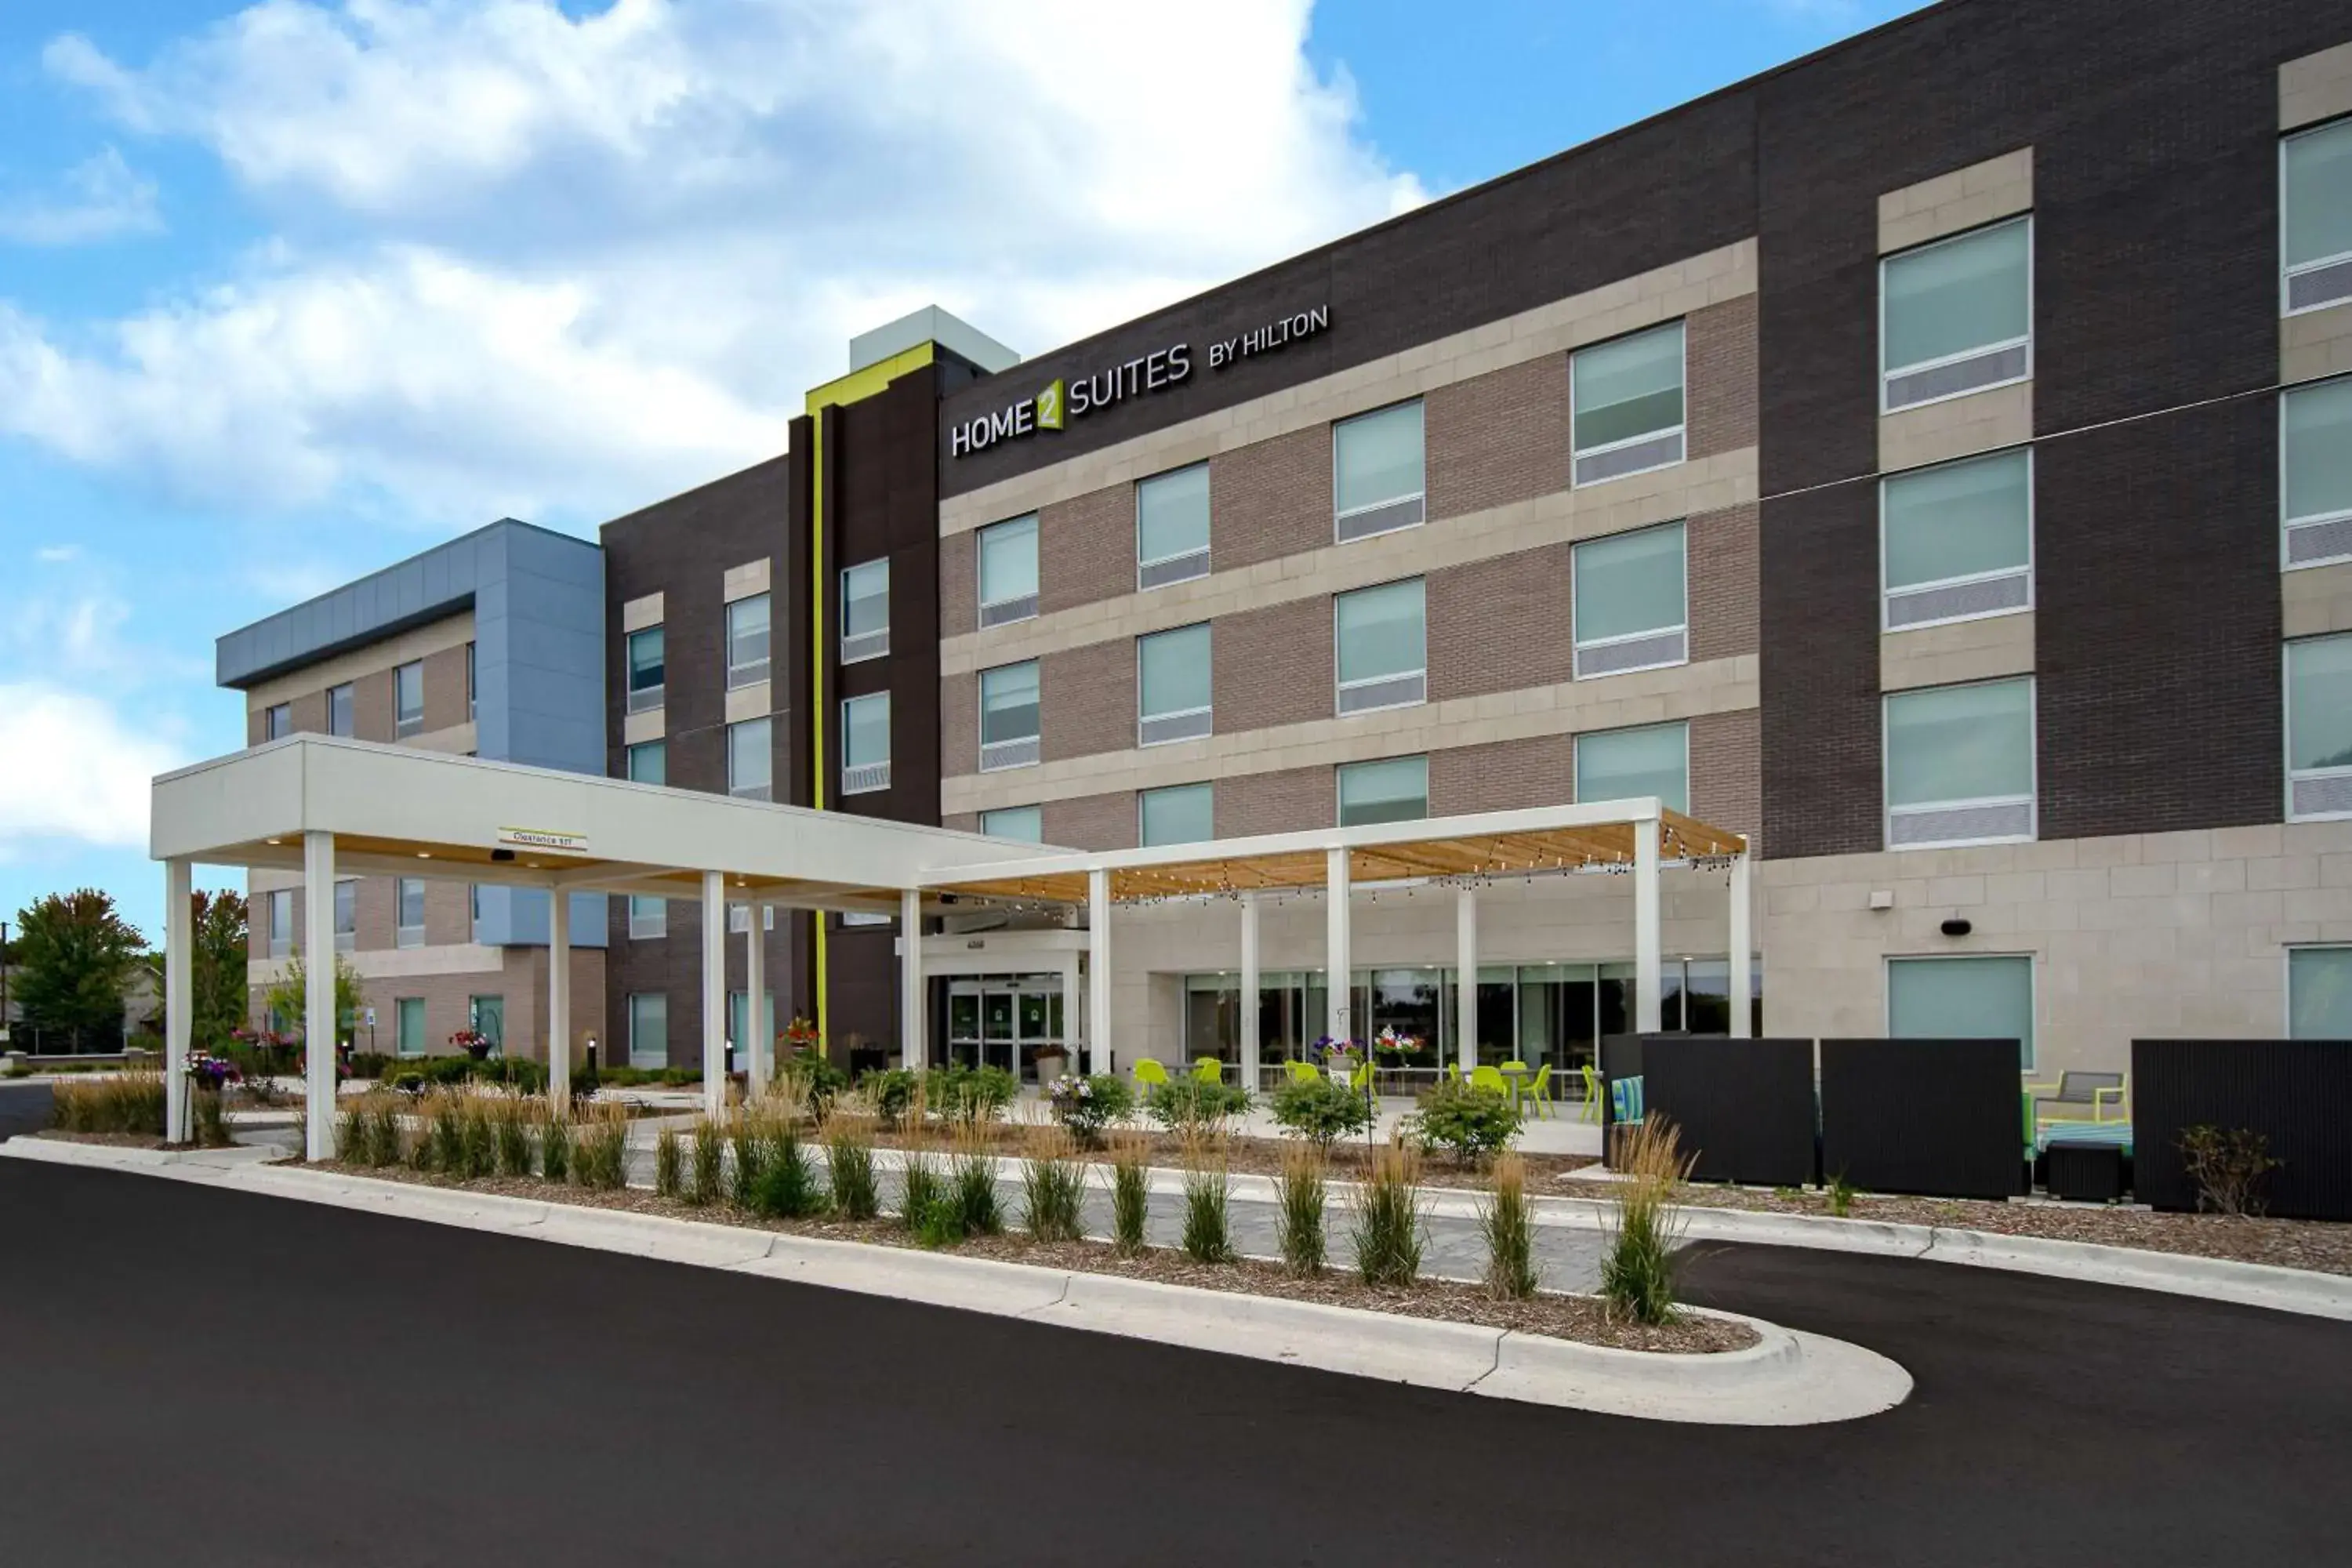 Property Building in Home2 Suites By Hilton Grand Rapids Airport